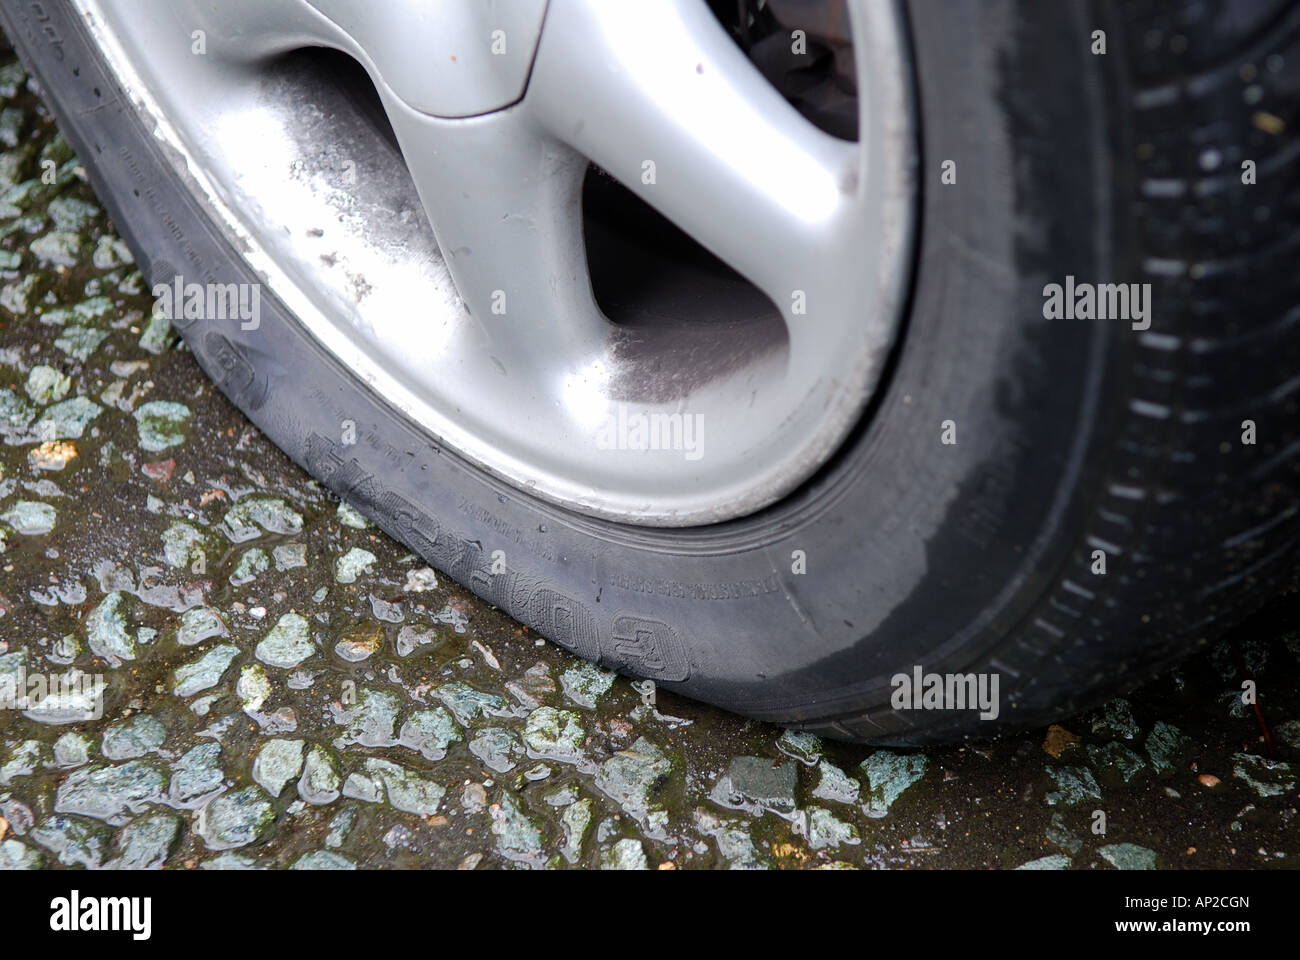 Puncture /flat tyre. Stock Photo